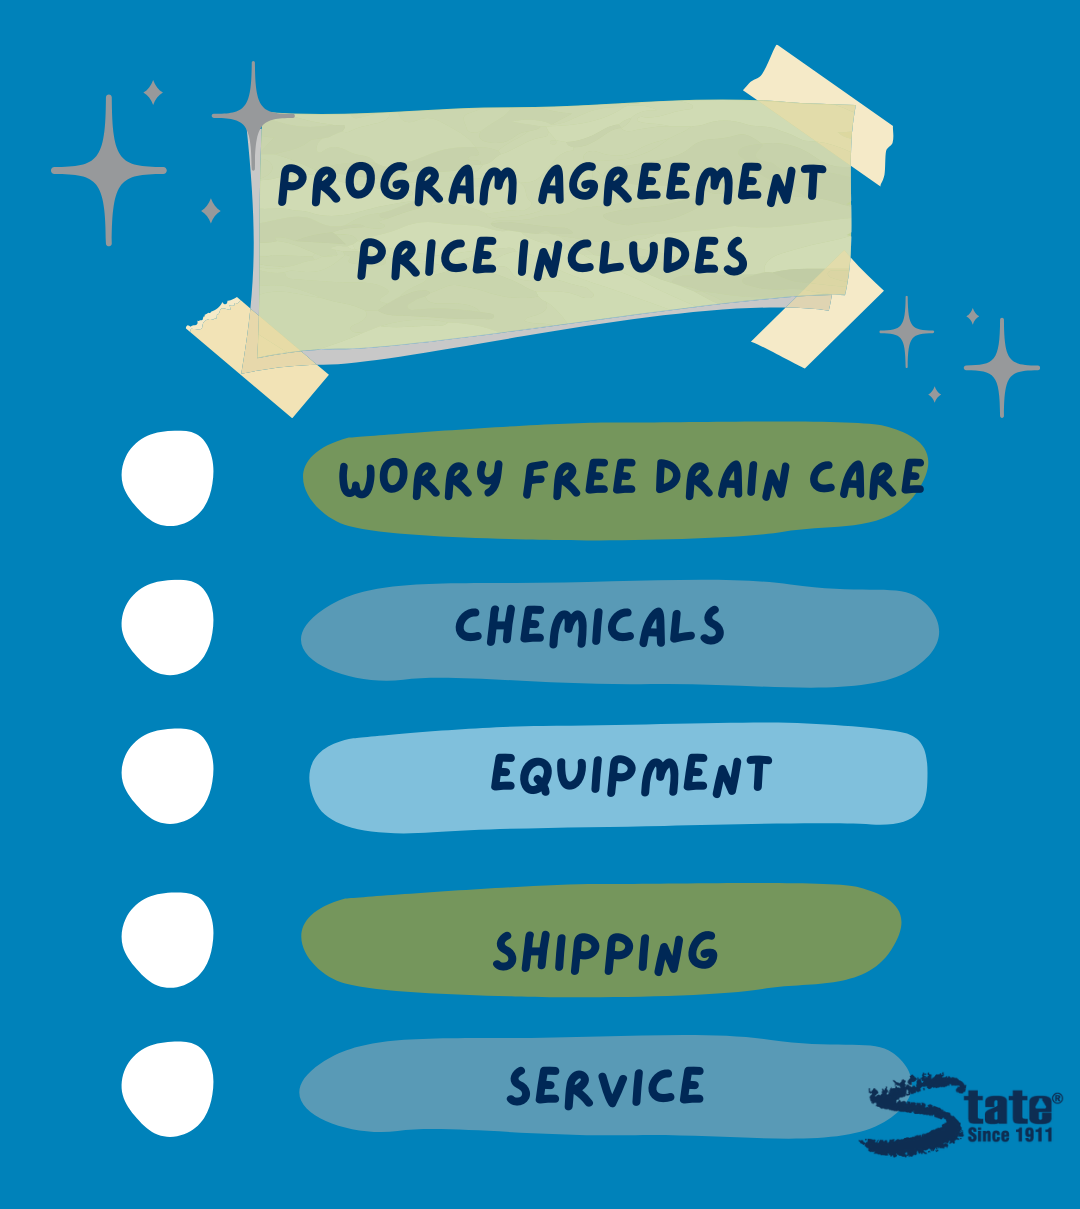 A list showing what is and is not included in the price of a drain care program agreement.  The price includes: worry free drain care, chemicals, equipment, shipping, and service.  However, the price does not include taxes.